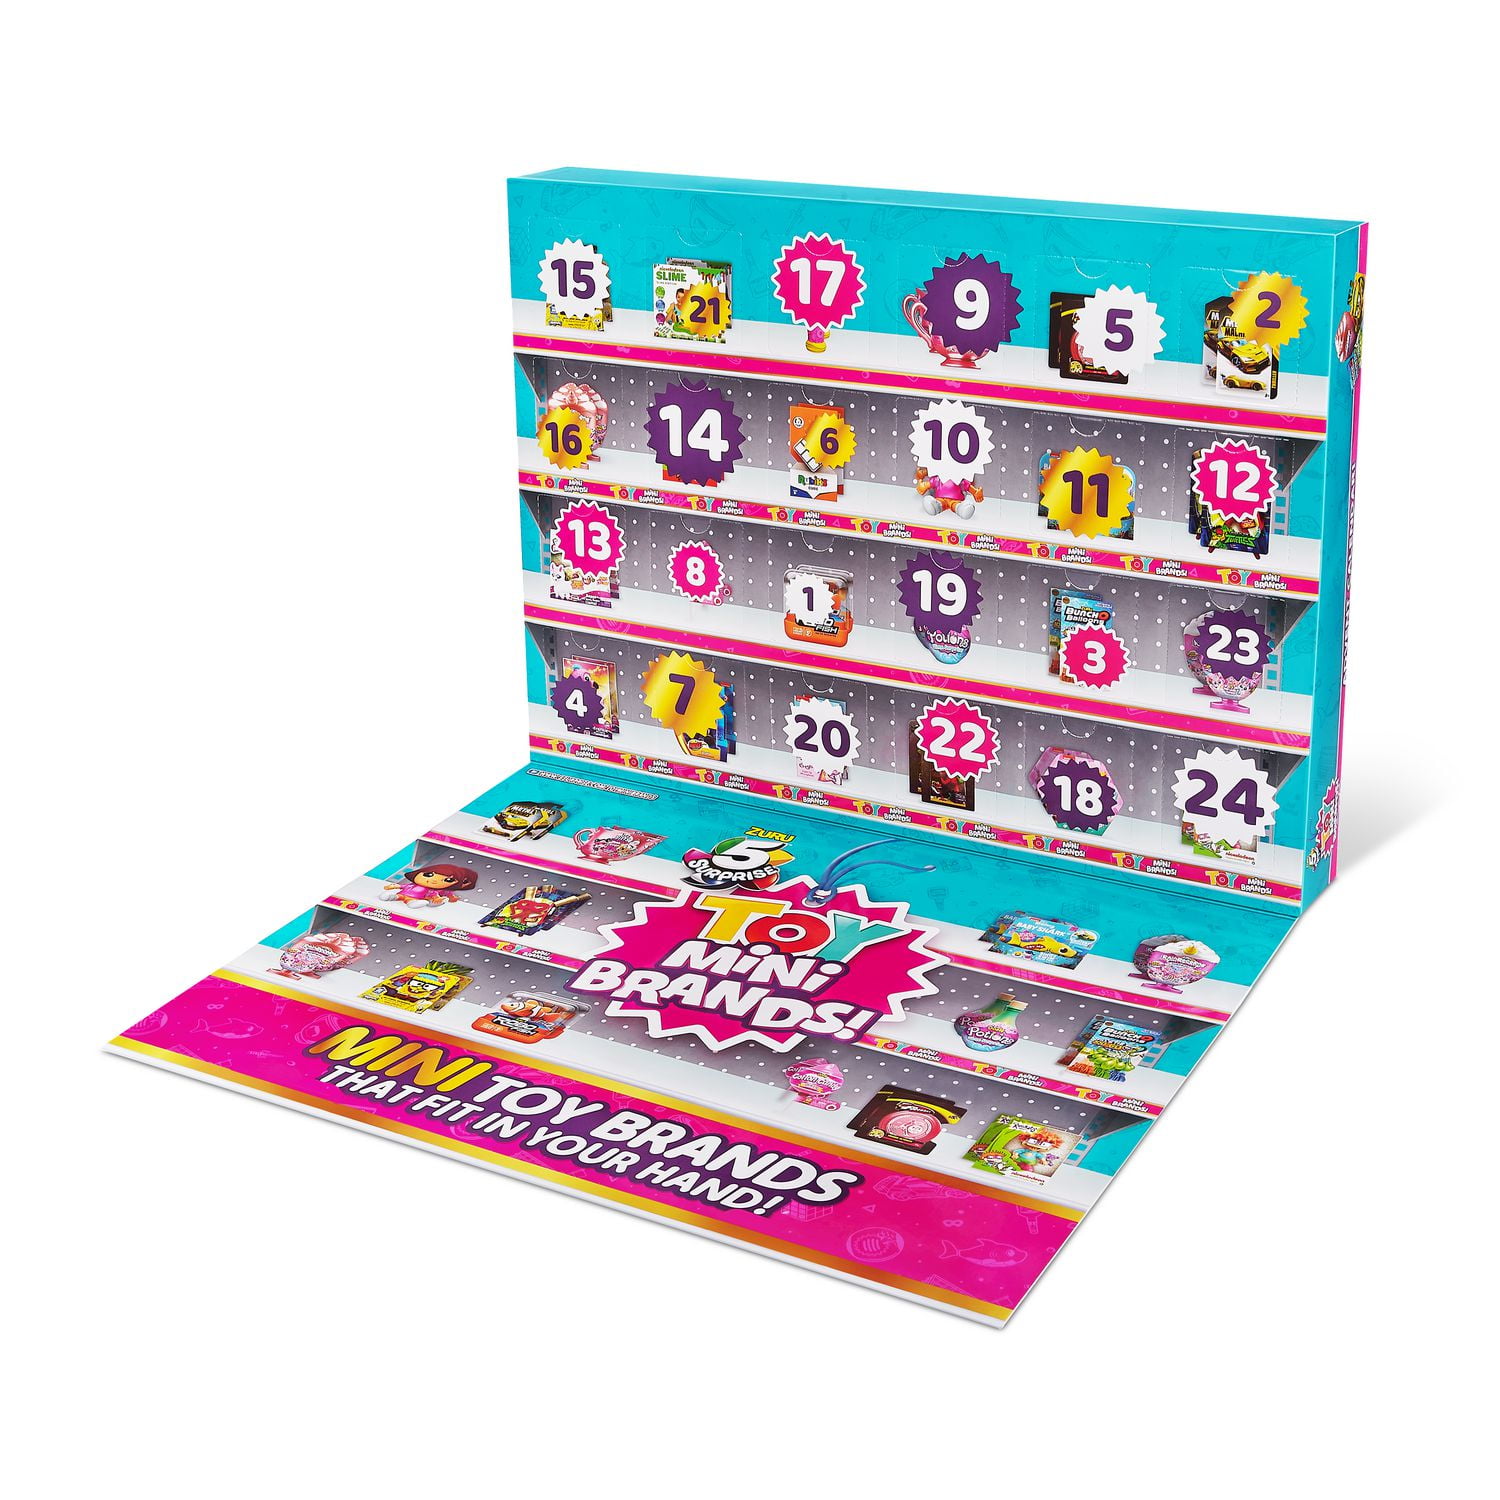 New! Toy Mini Brands Advent Calendar All Days Unboxed